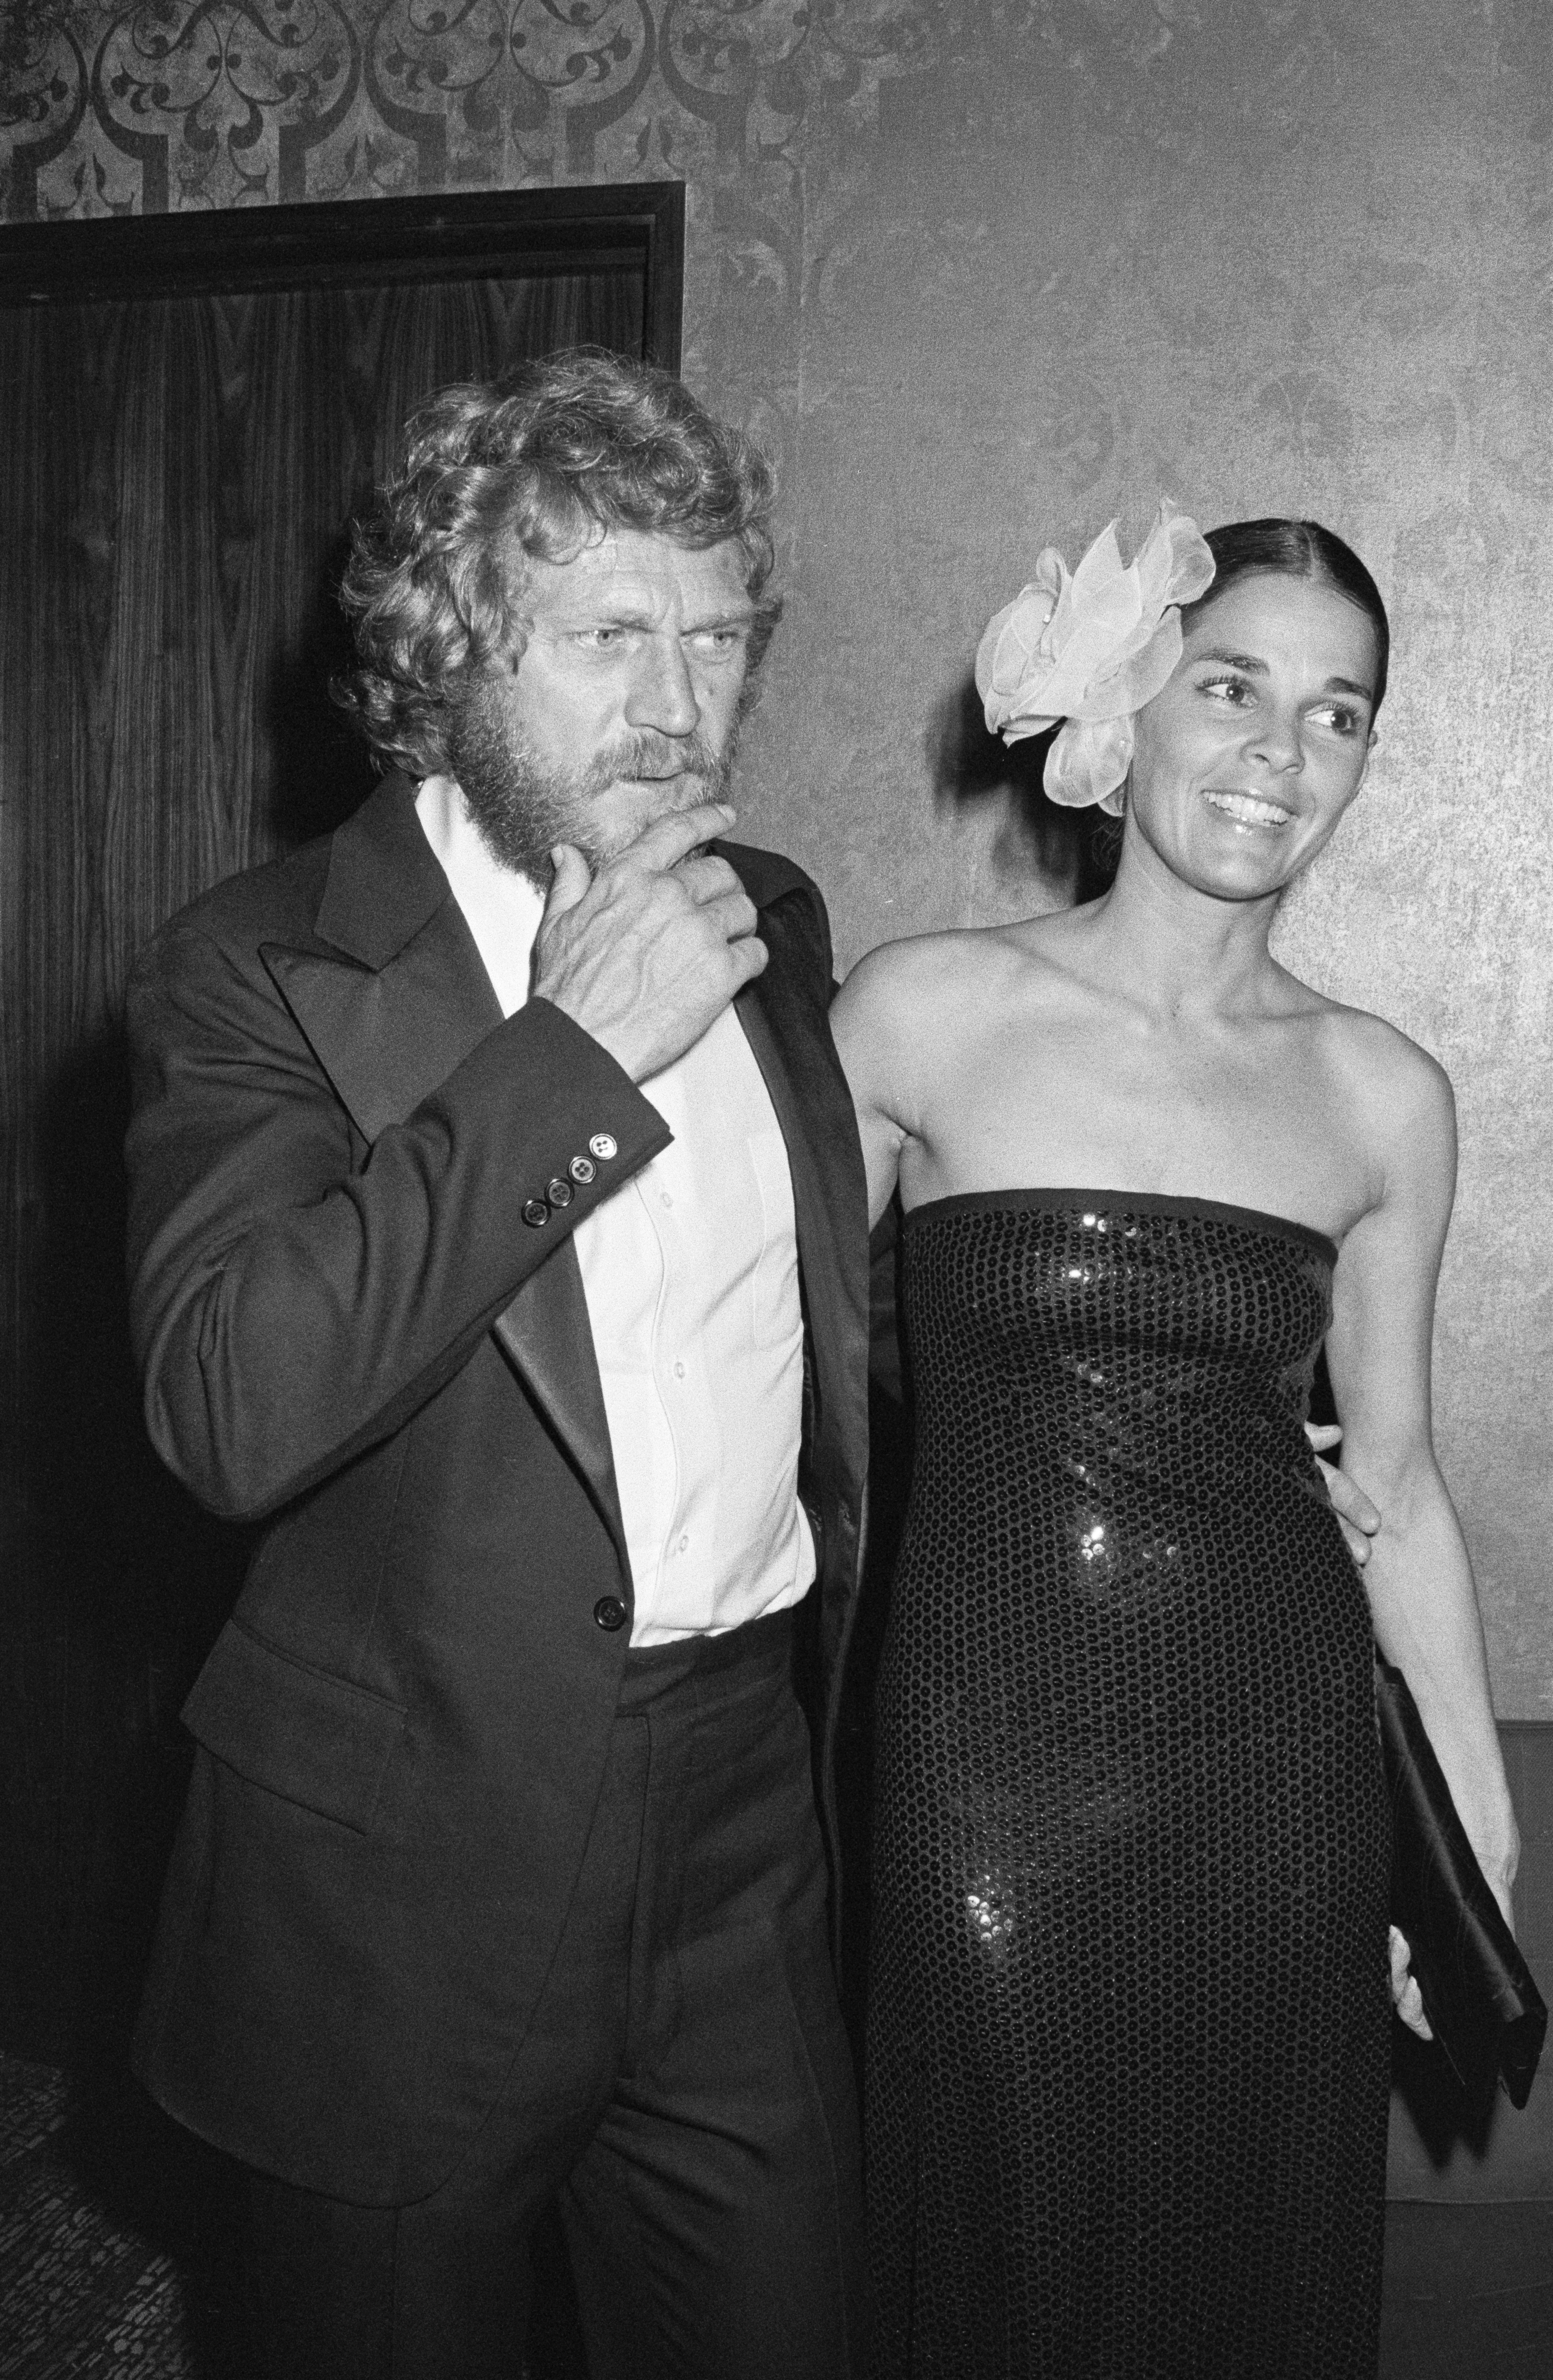 Steve McQueen and Ali MacGraw at the James Cagney tribute party on March 1, 1974 | Source: Getty Images